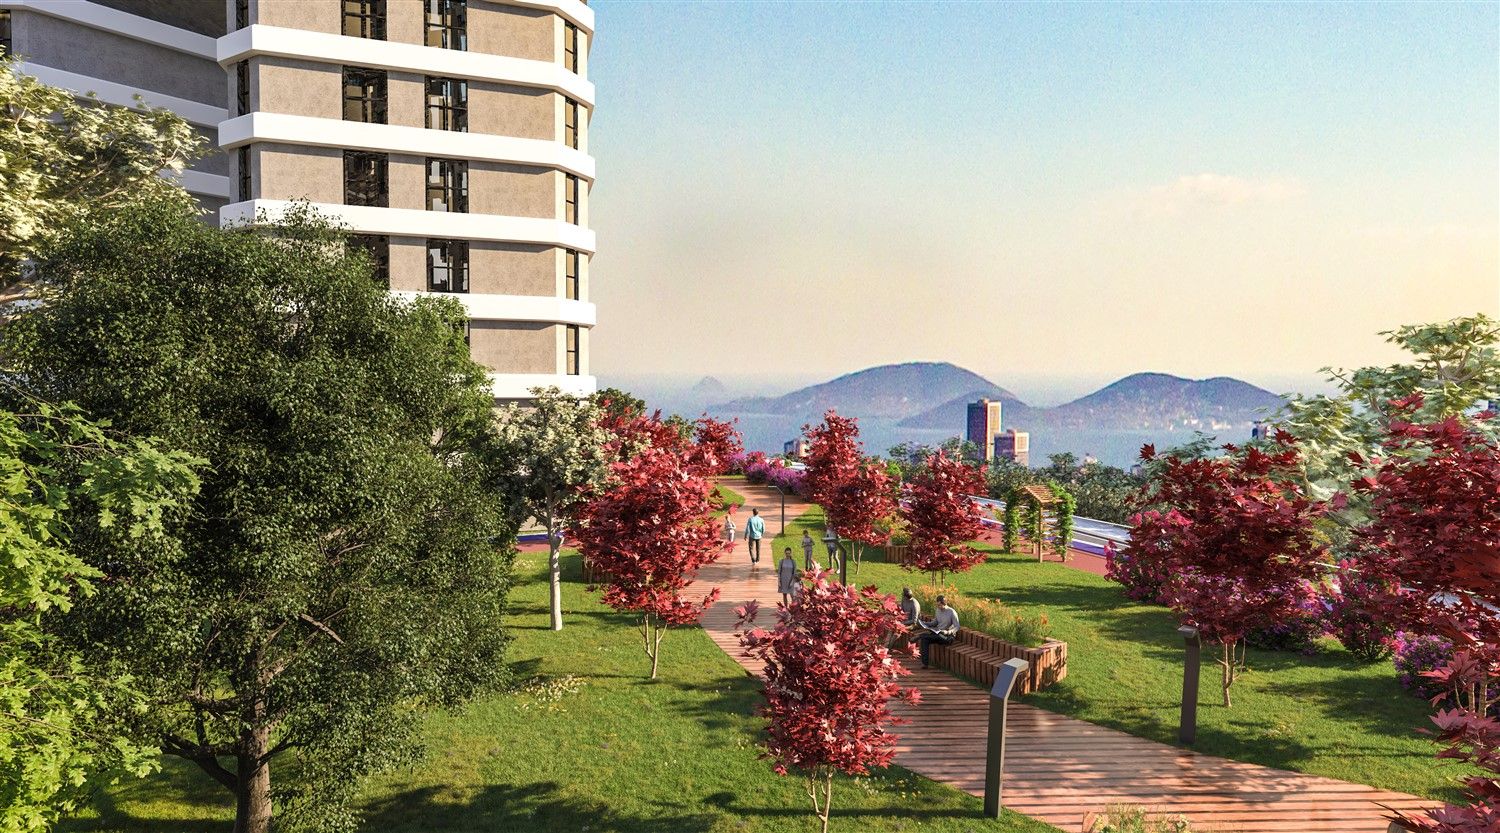 New apartments overlooking the Marmara Sea in İstanbul